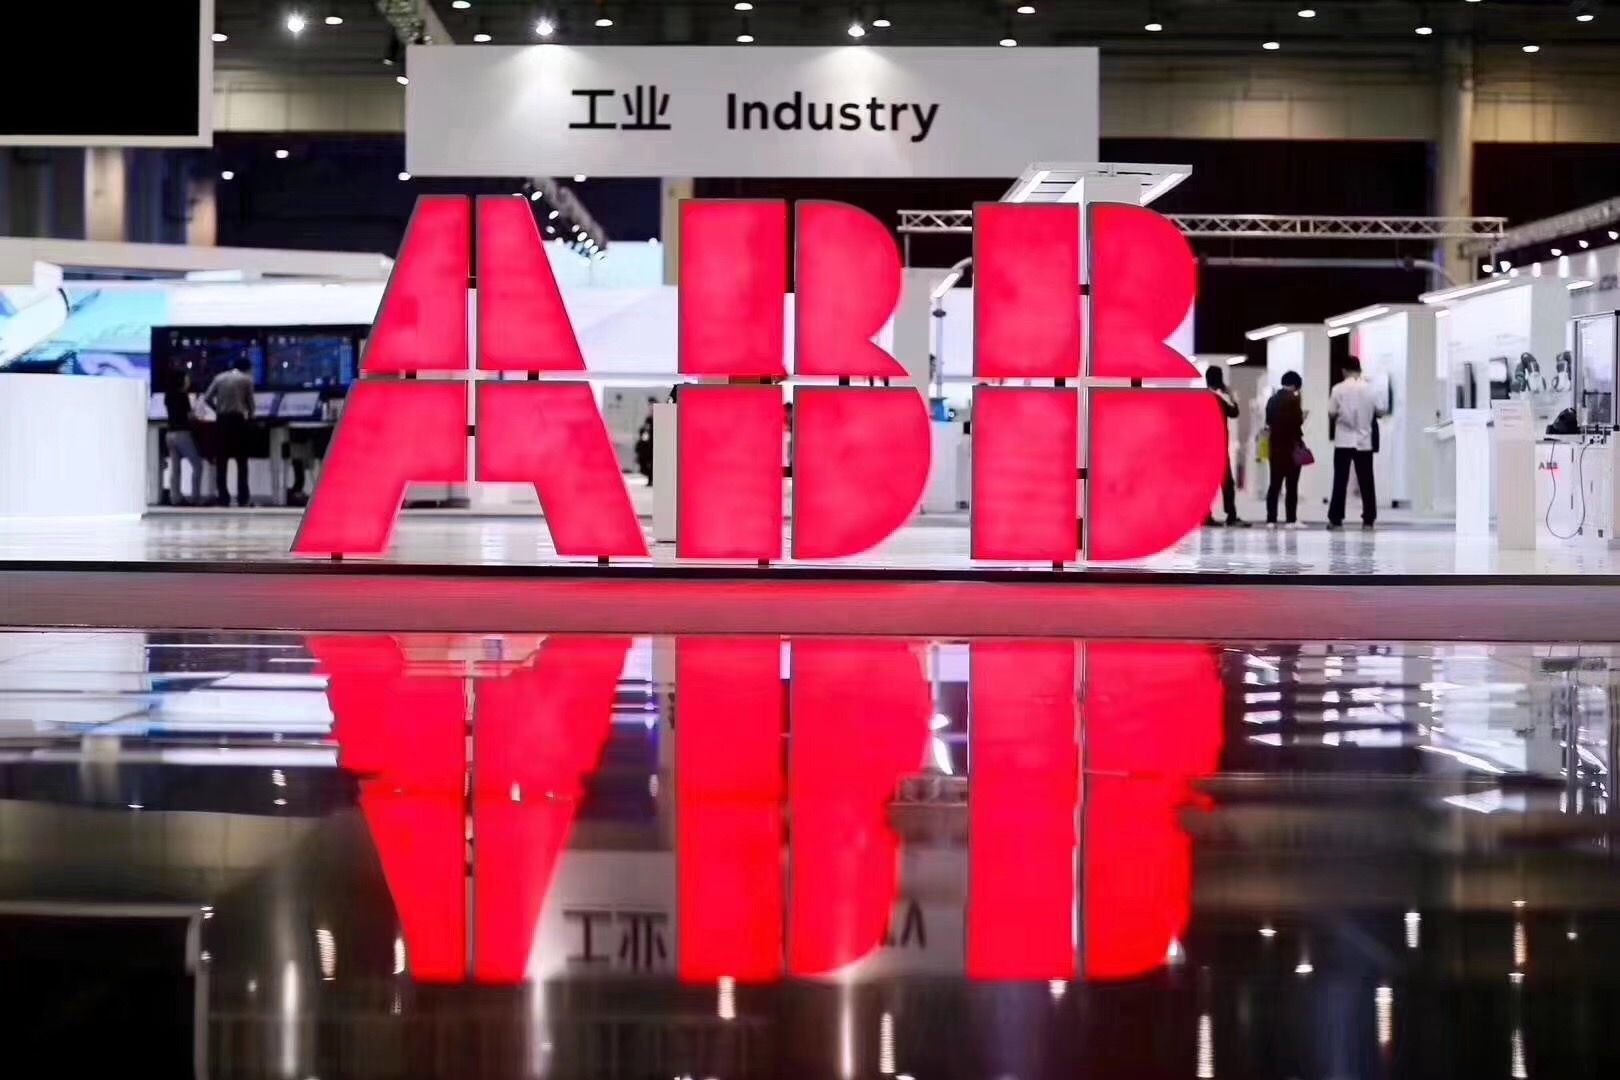 ABB motors and generators are favored by many industries such as ships ports power petrochemical water food and beverage